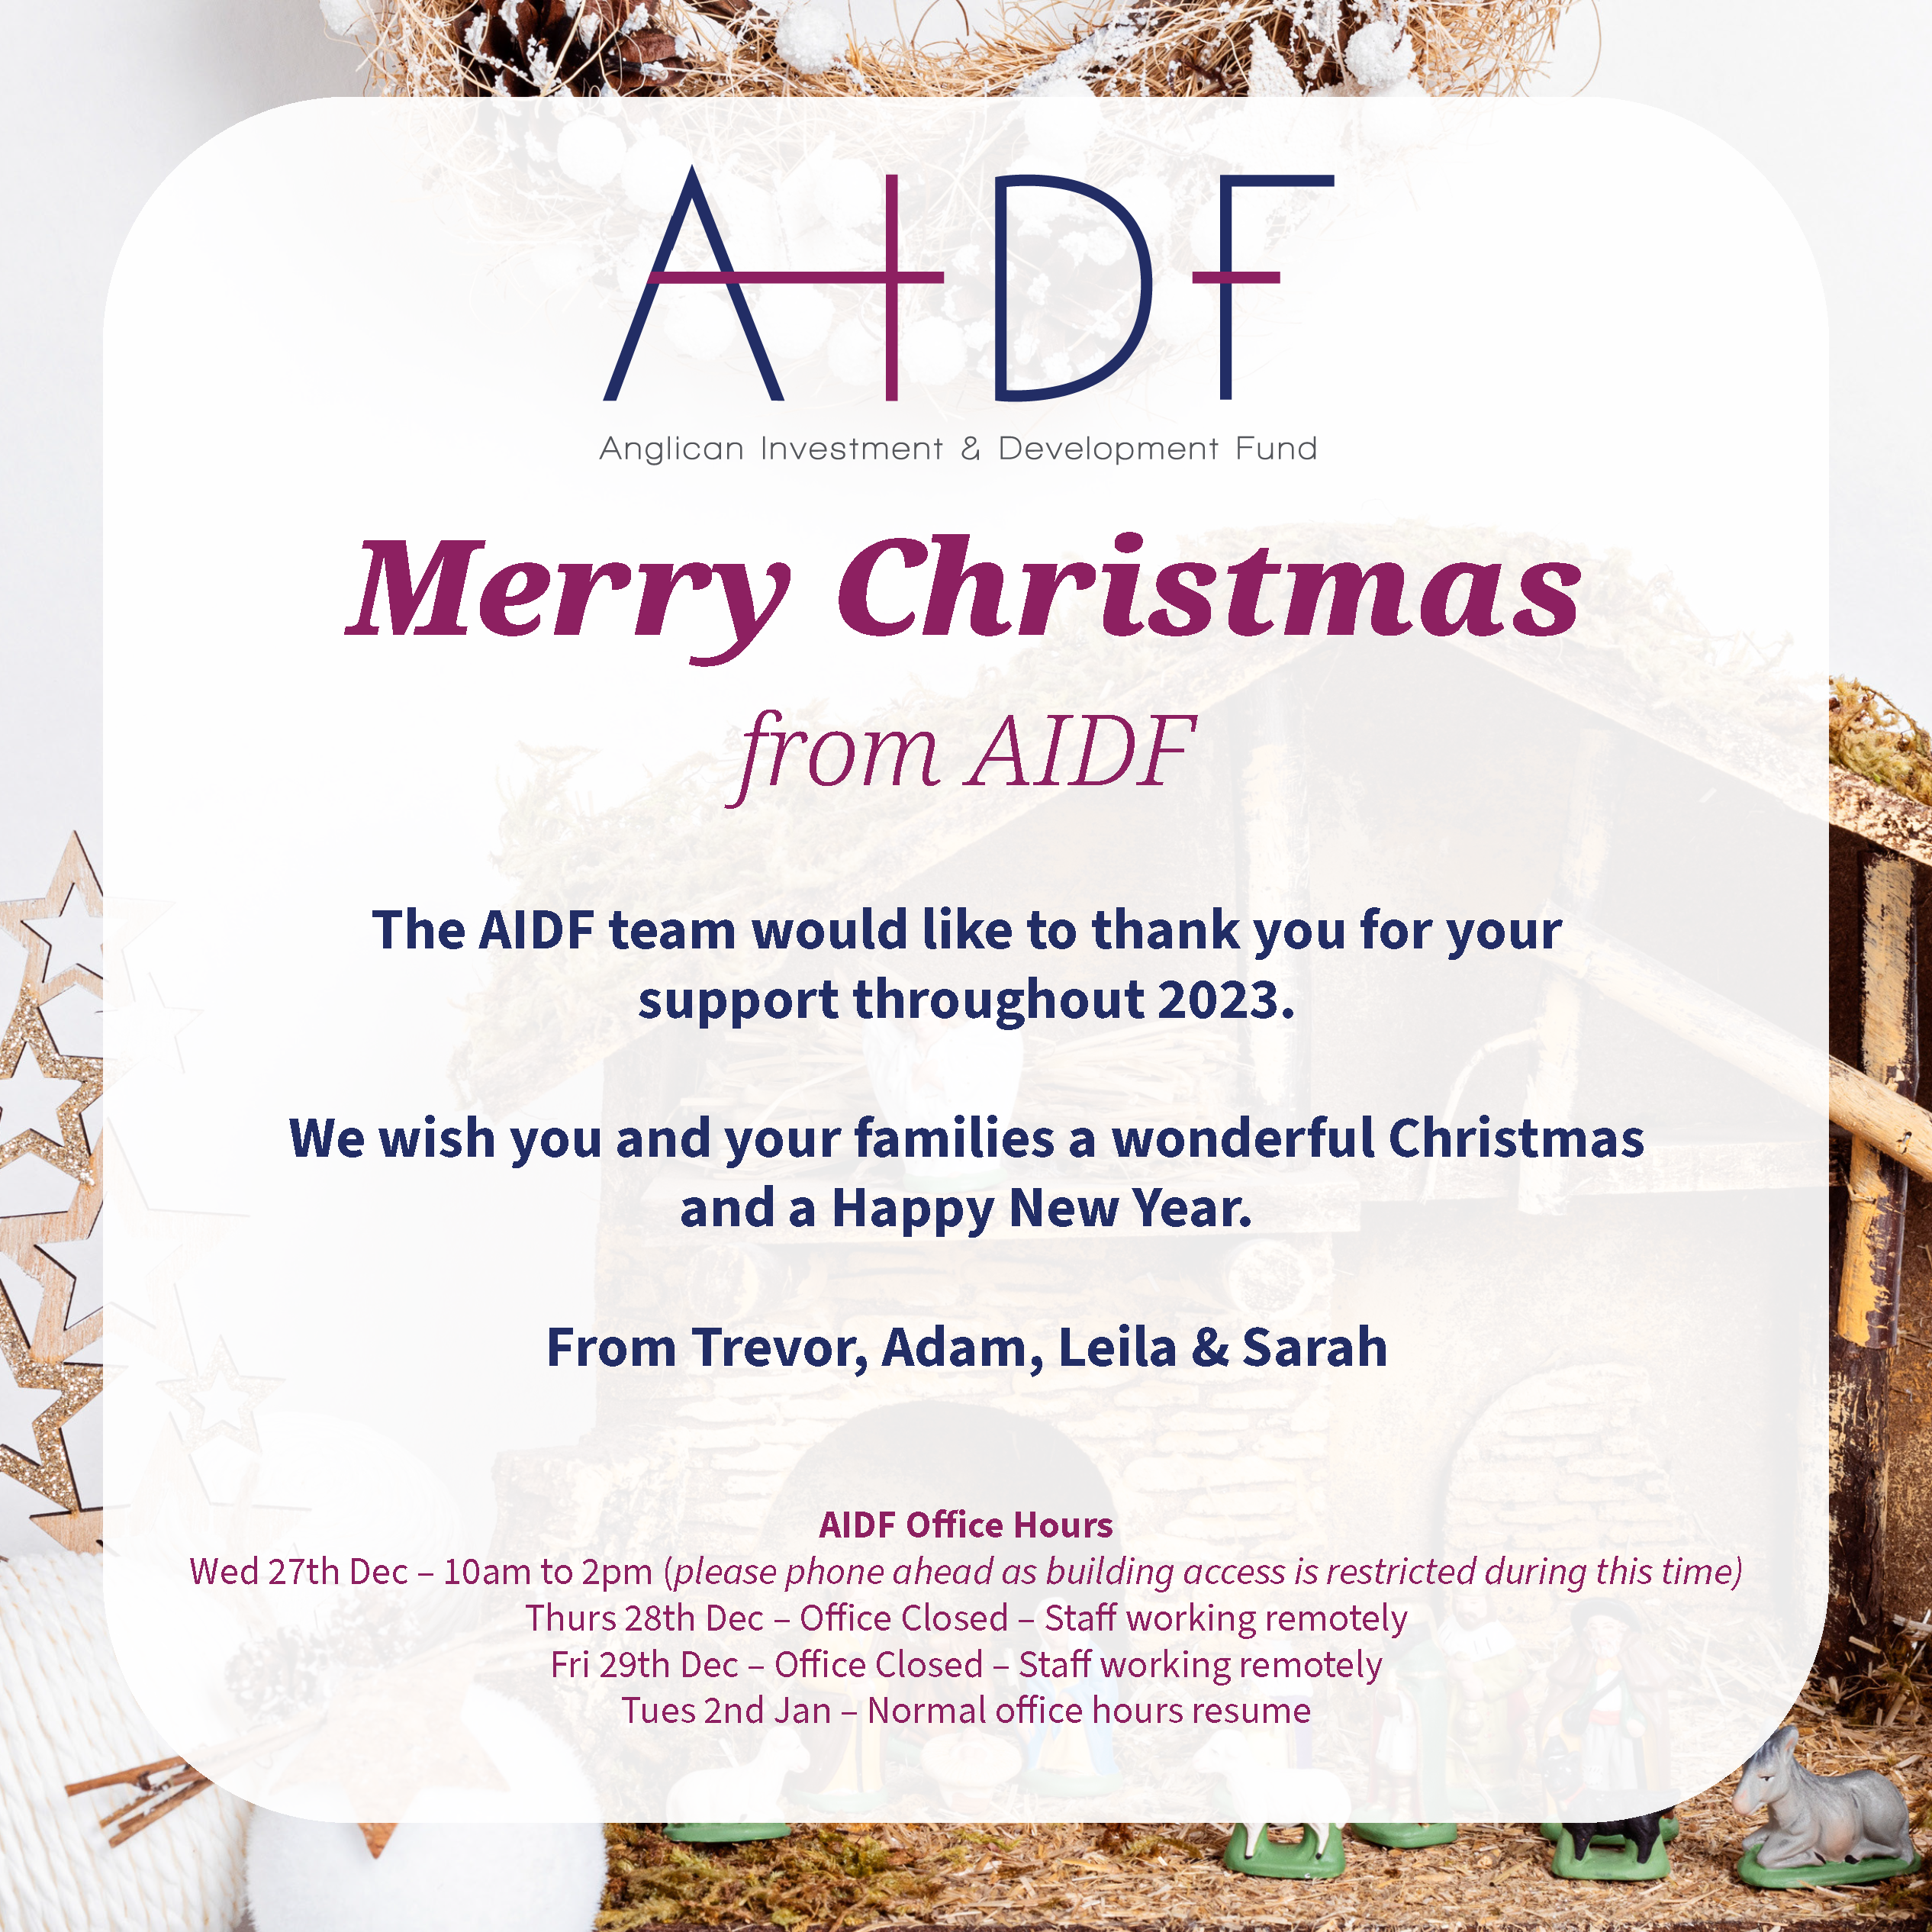 Merry Christmas from AIDF!